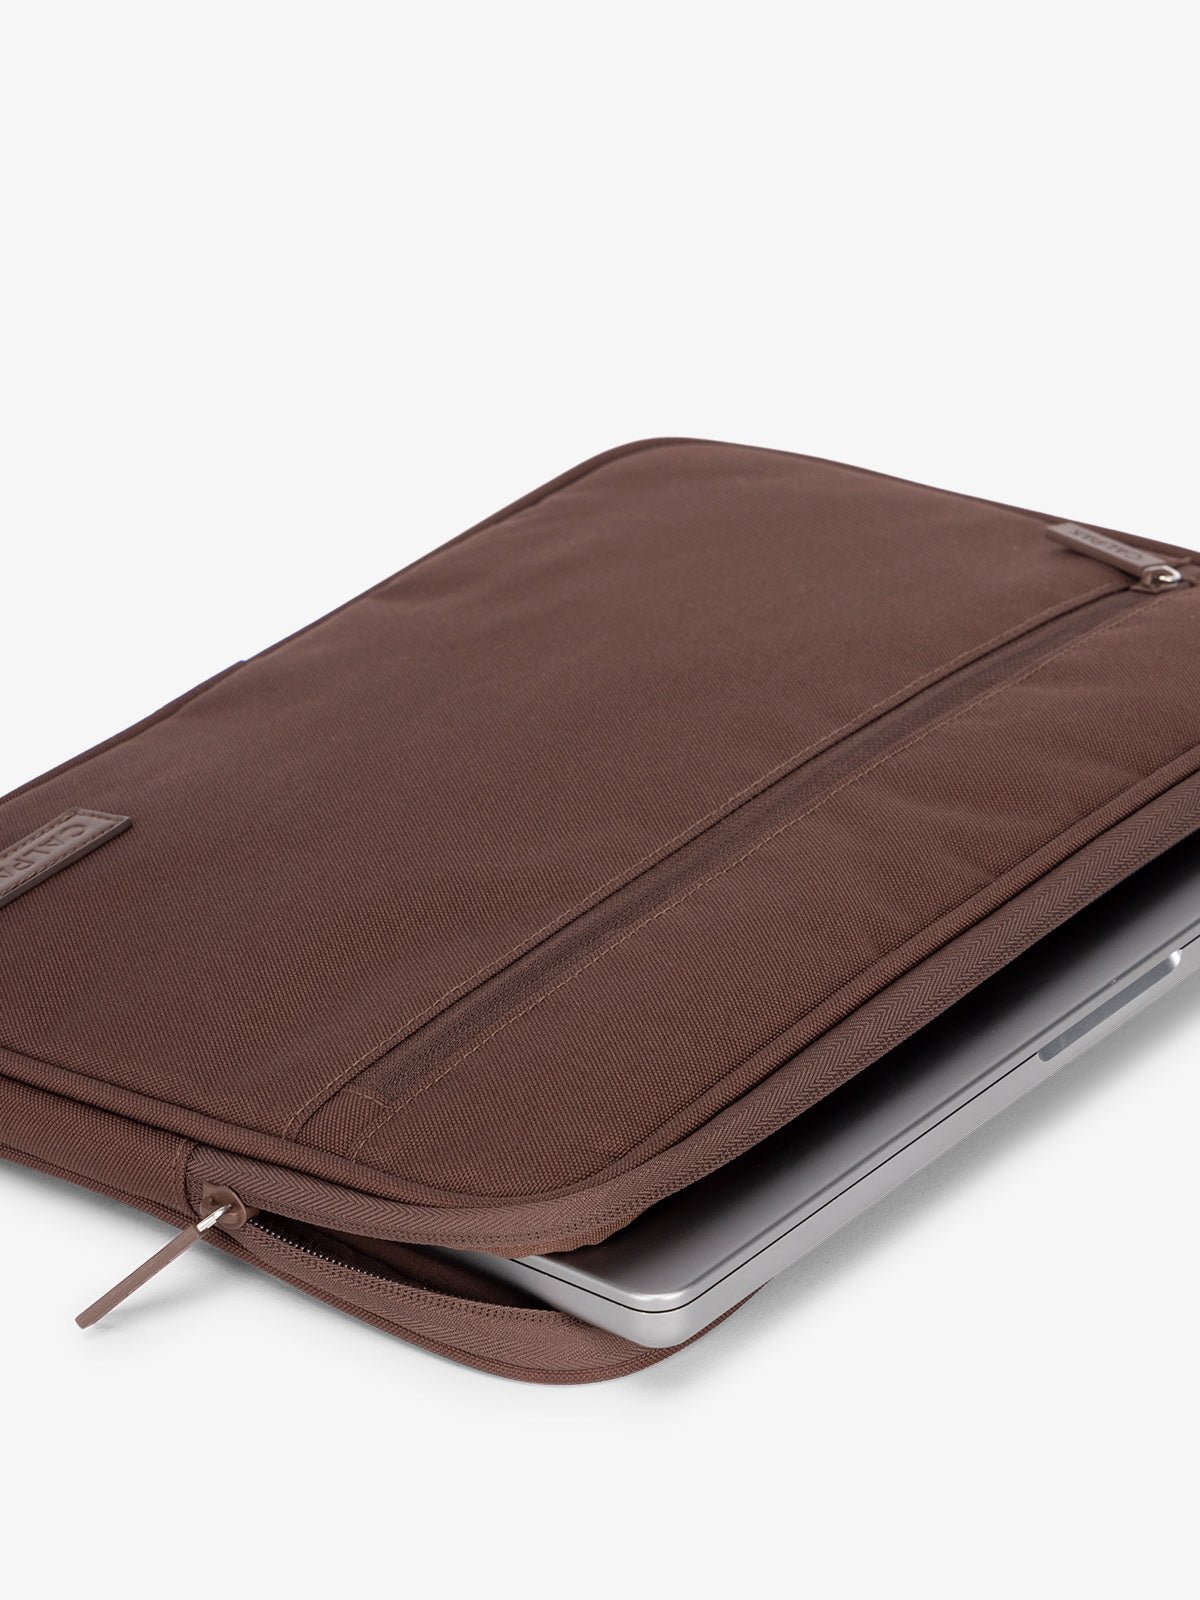 CALPAK 13-14" laptop sleeve with front zipper pouch in walnut brown